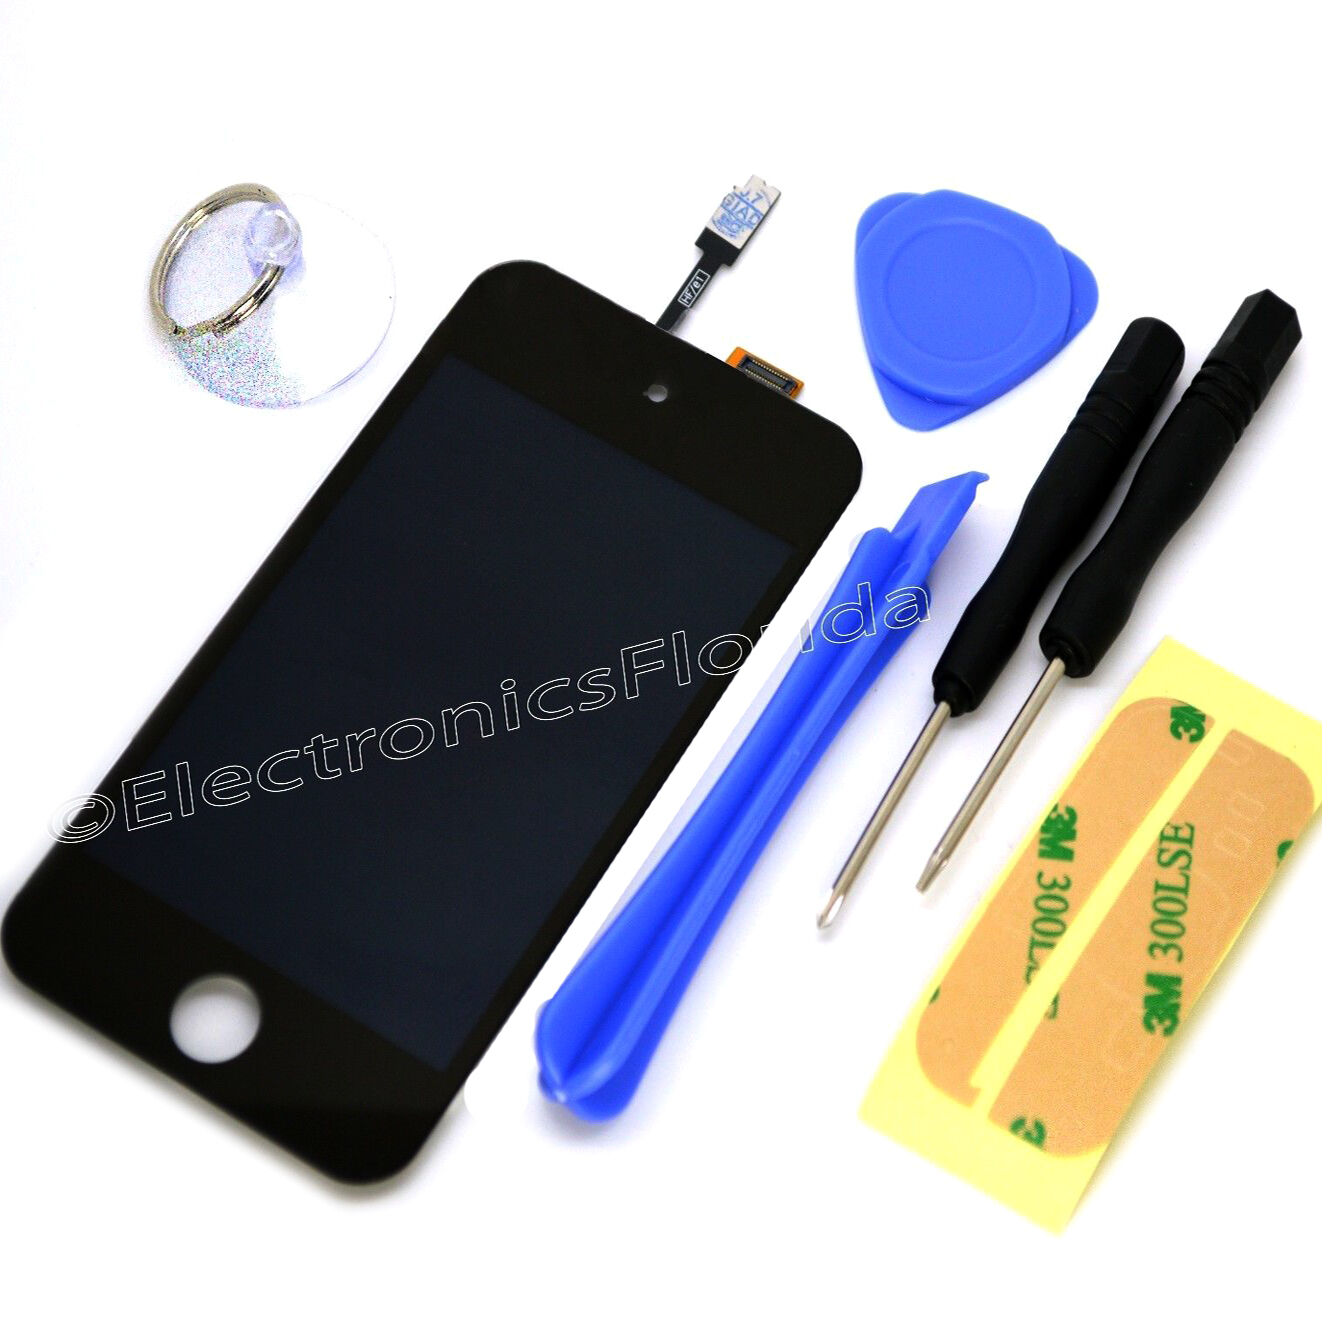  iPod Touch 4th Gen LCD Screen Replacement Digitizer Glass Assembly black tools